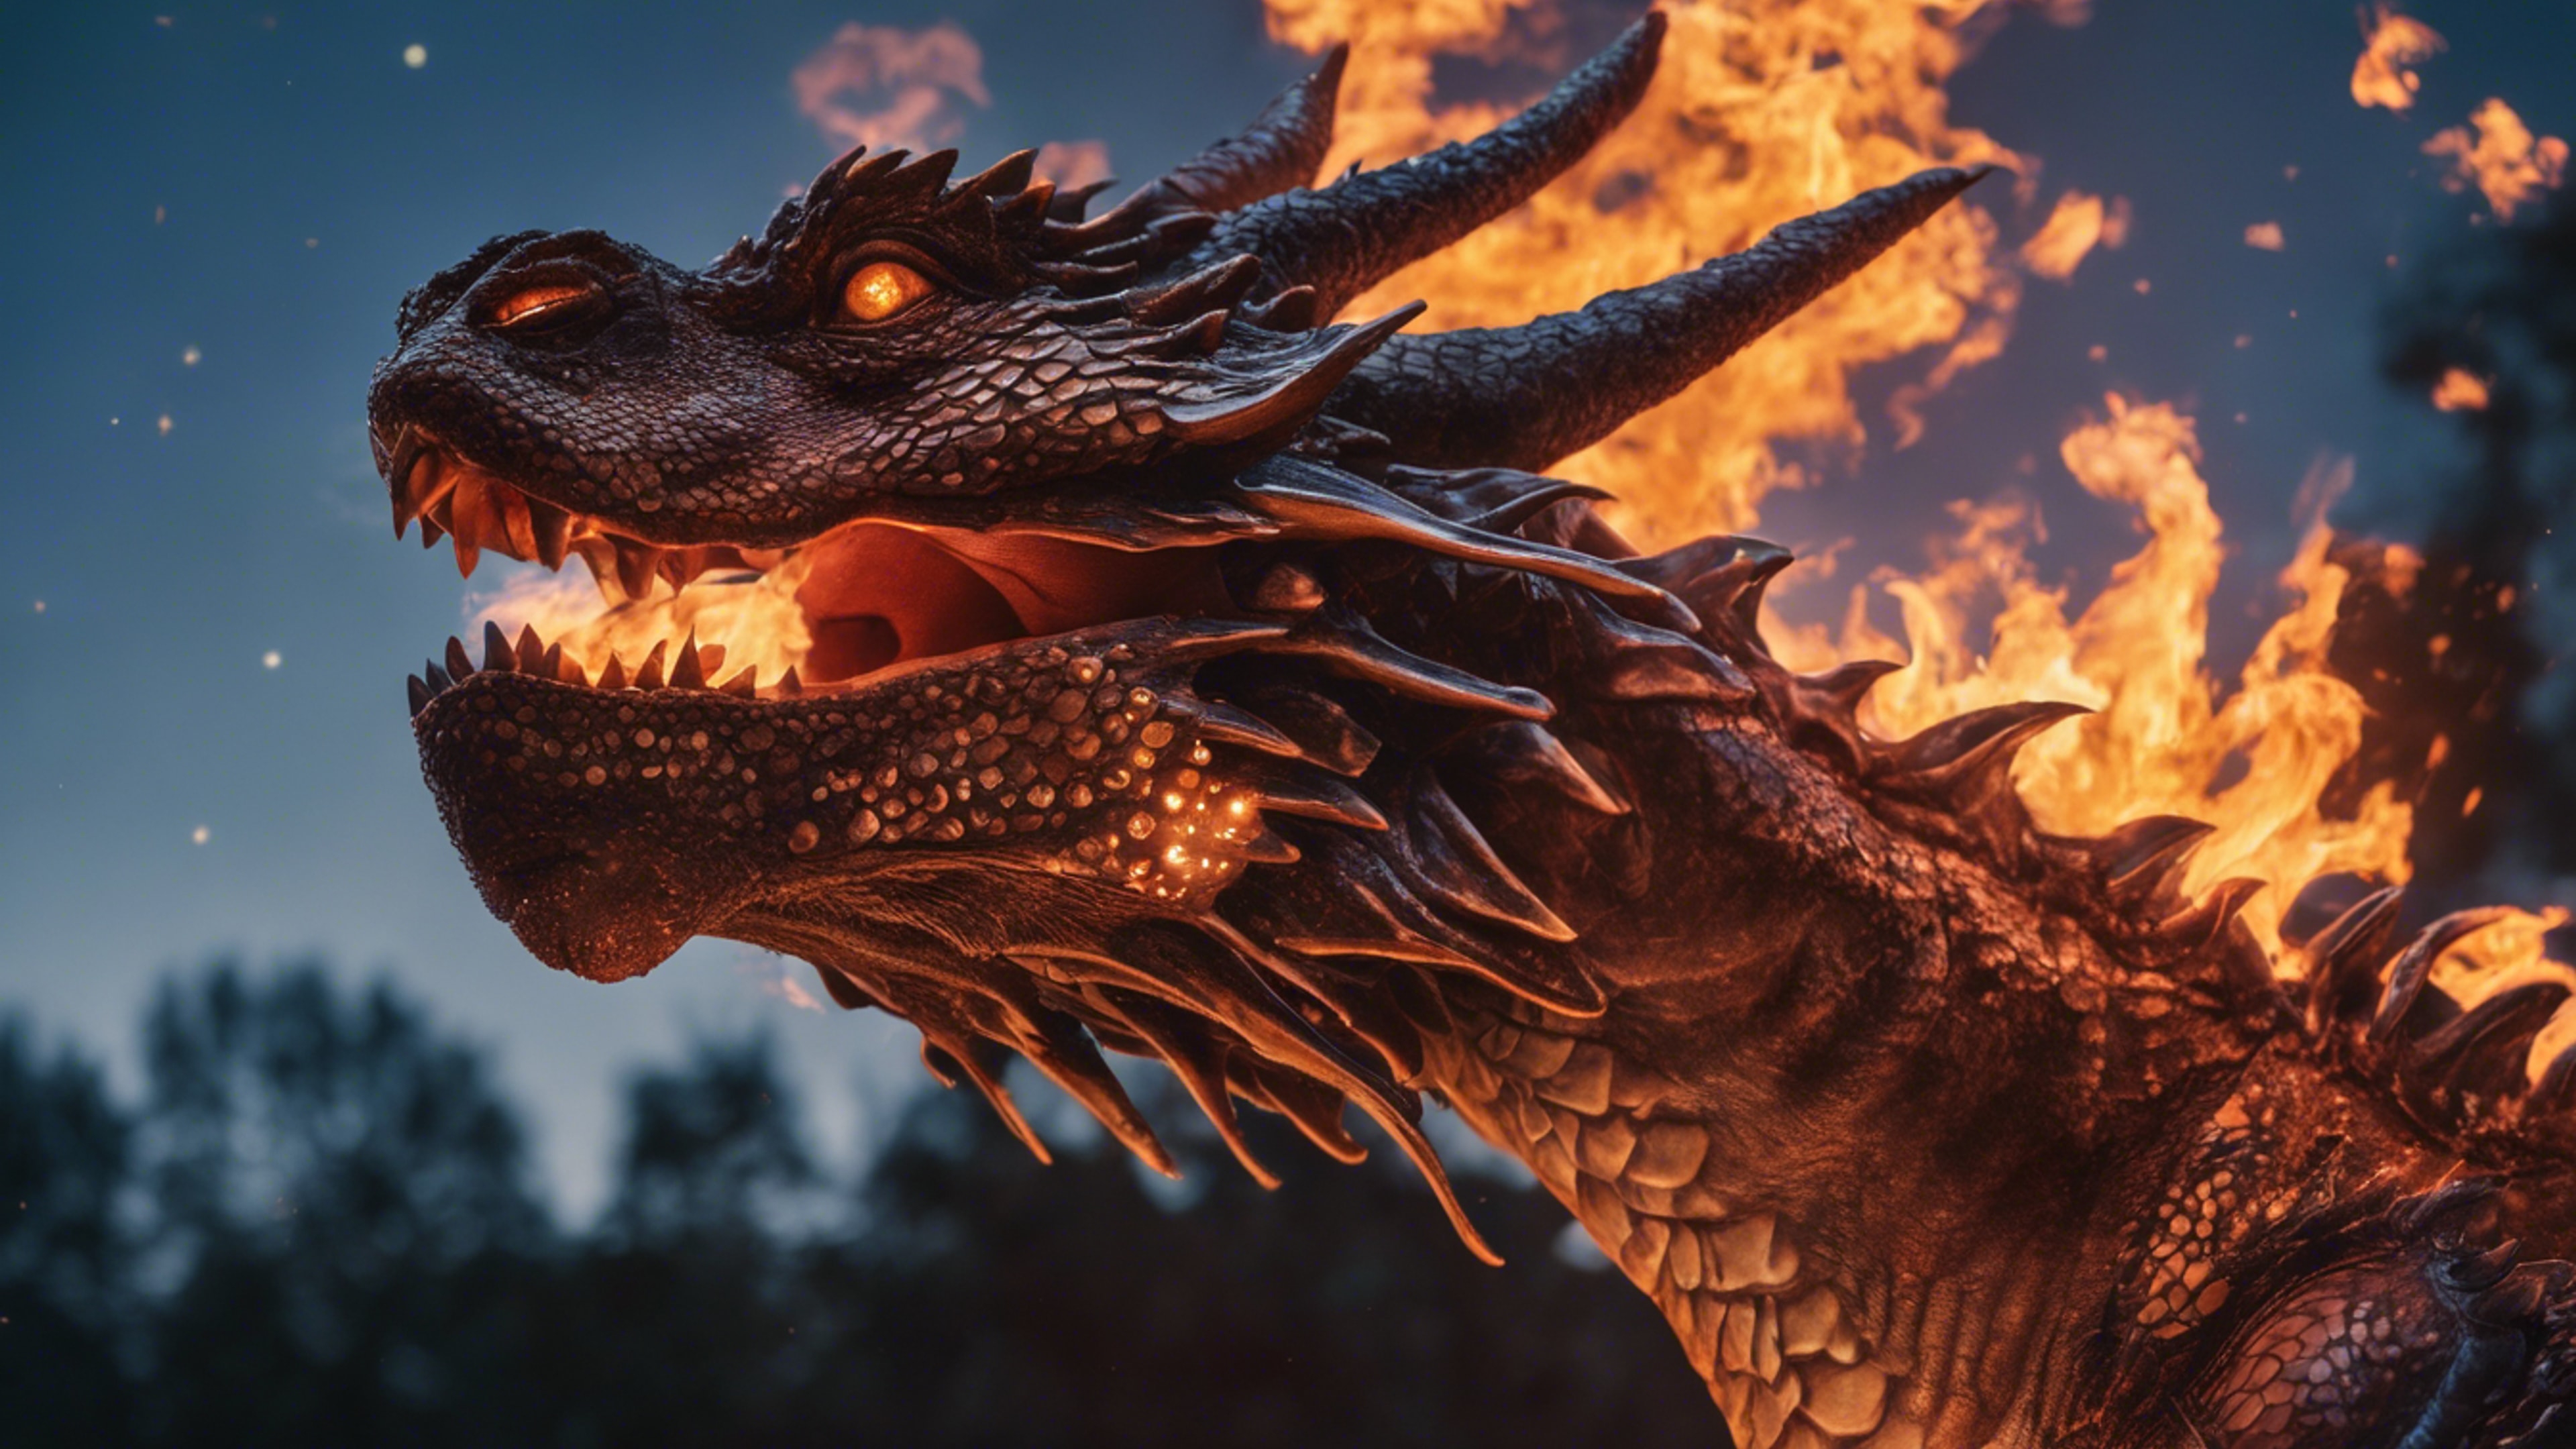 A fire-breathing dragon surrounded by the glow of its own flames against a night sky. Тапет[8f1bf836869843a19451]